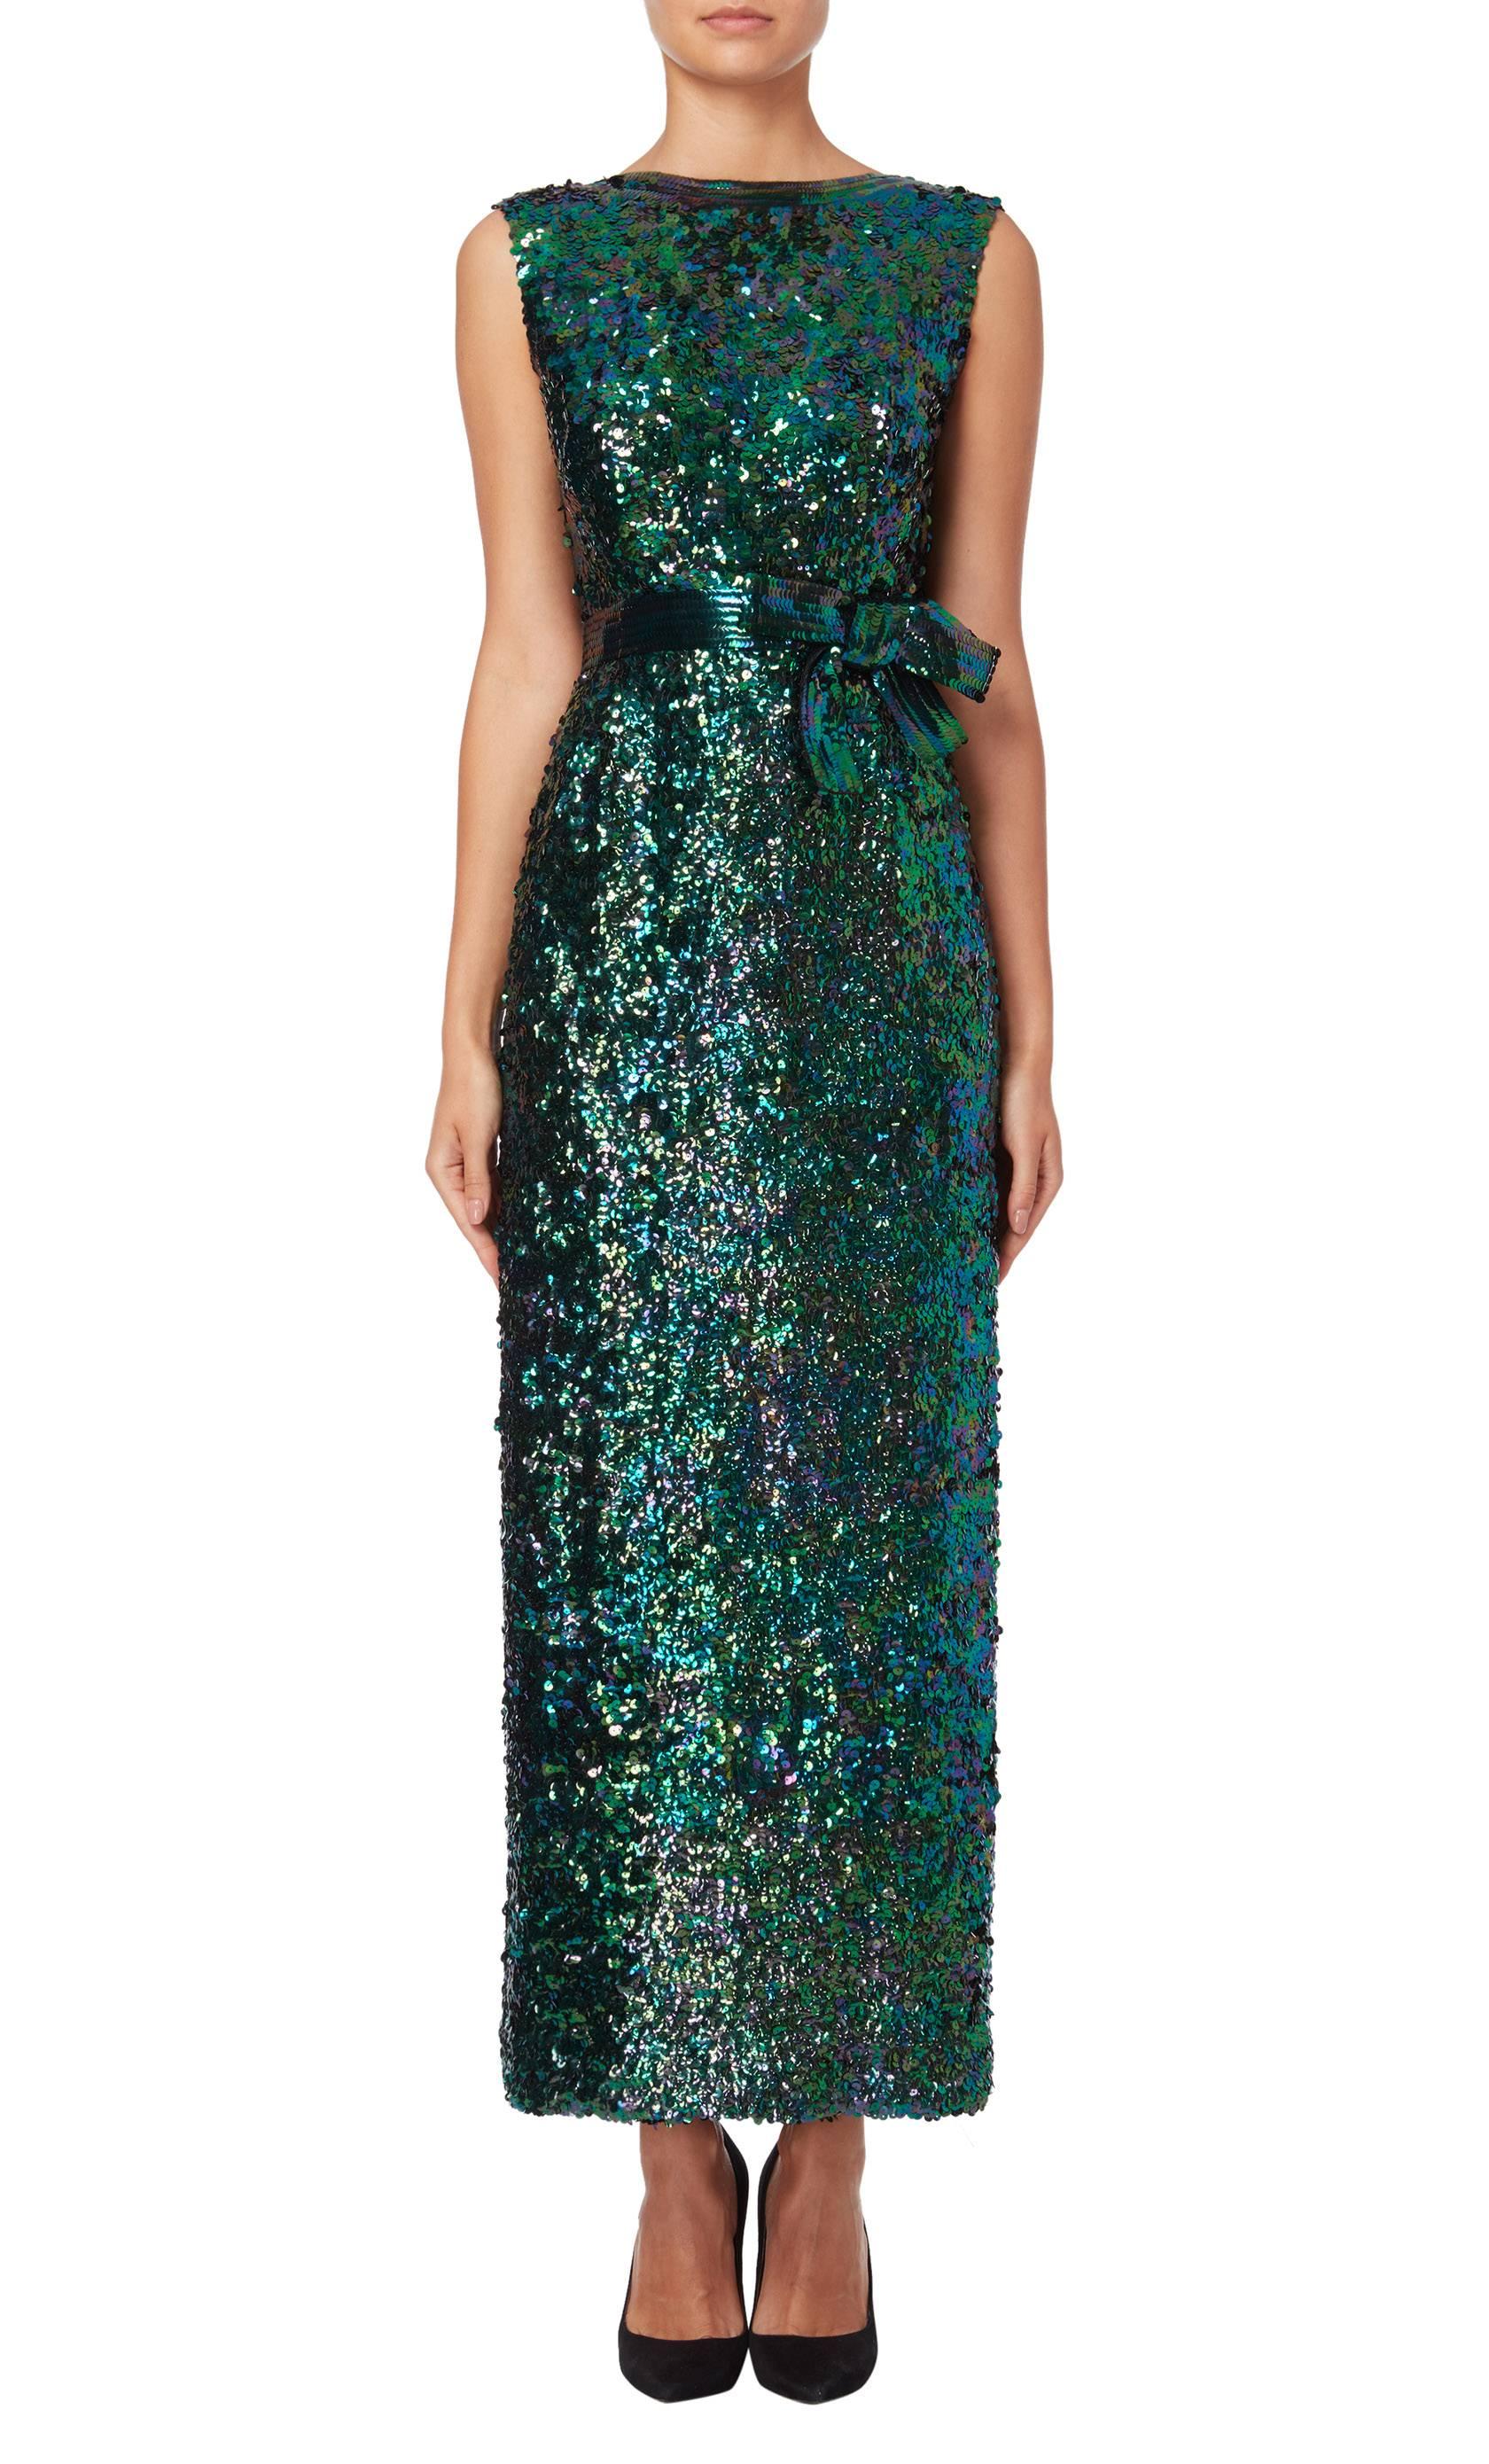 This elegant Norman Norell 1960’s gown is adorned with green, blue and purple sequins and features a sequined bow to the waist. A stunning low cut back is met with a short tie to the small of the back